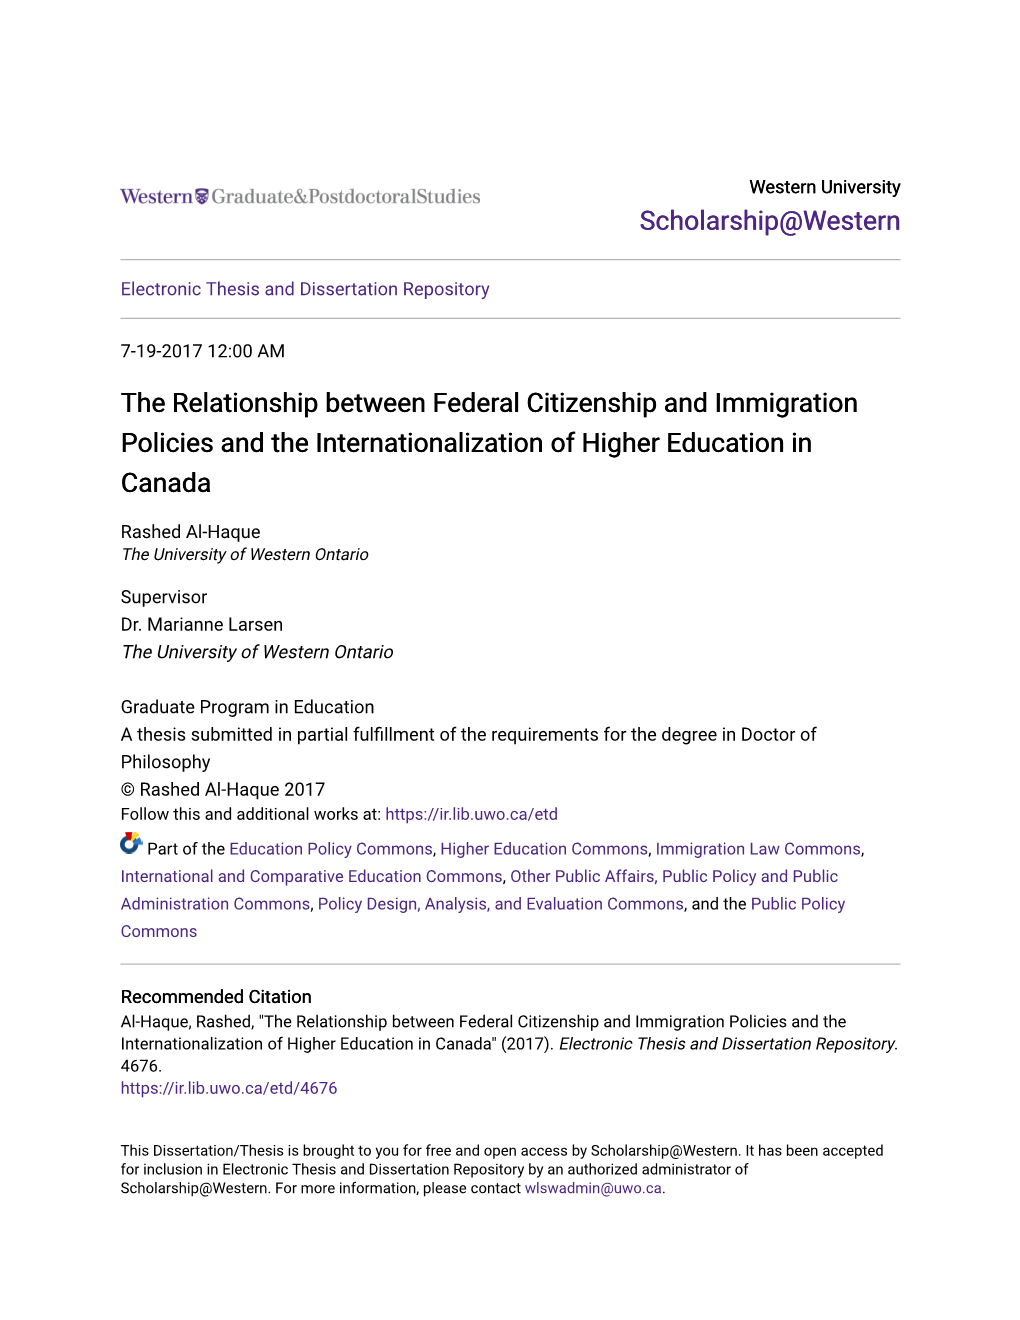 The Relationship Between Federal Citizenship and Immigration Policies and the Internationalization of Higher Education in Canada